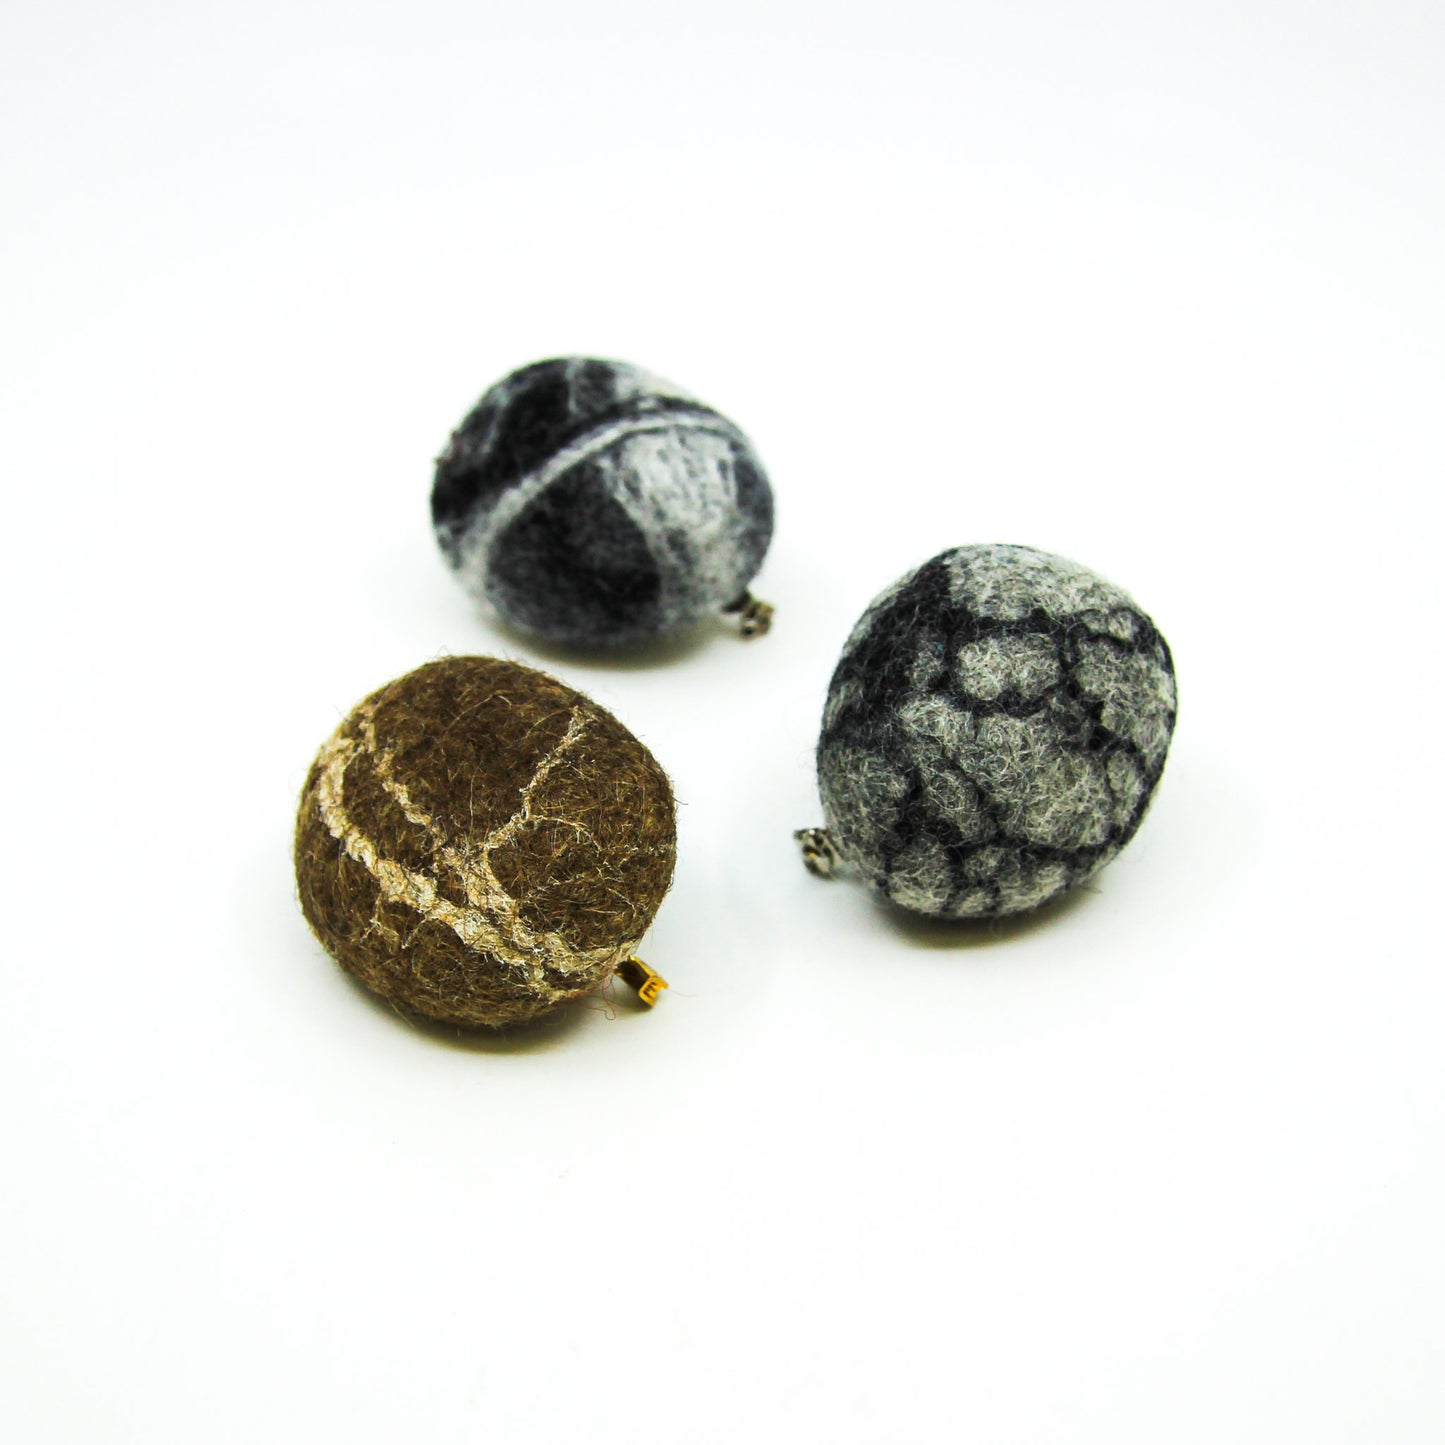 Felted rocks with pins